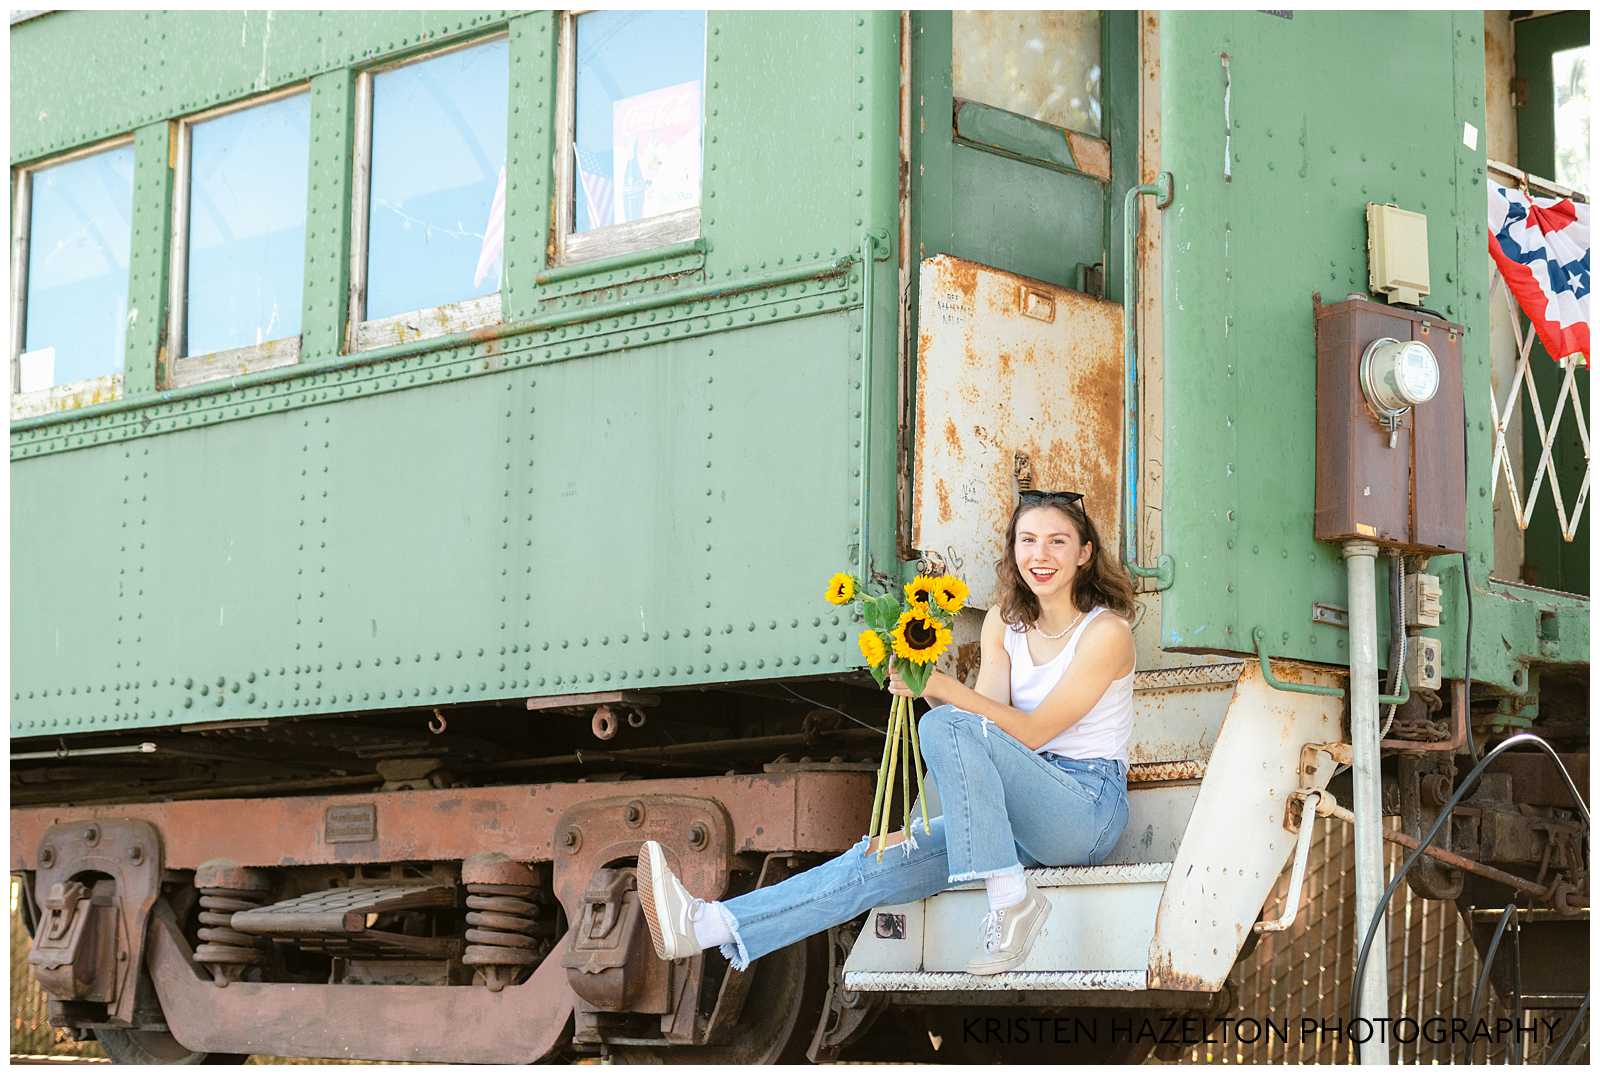 High school senior pics on a train by San Jose, CA Senior Photographer Kristen Hazelton. A girl wearing a white shirt and blue jeans sits on train  car steps while holding a bouquet of sunflowers